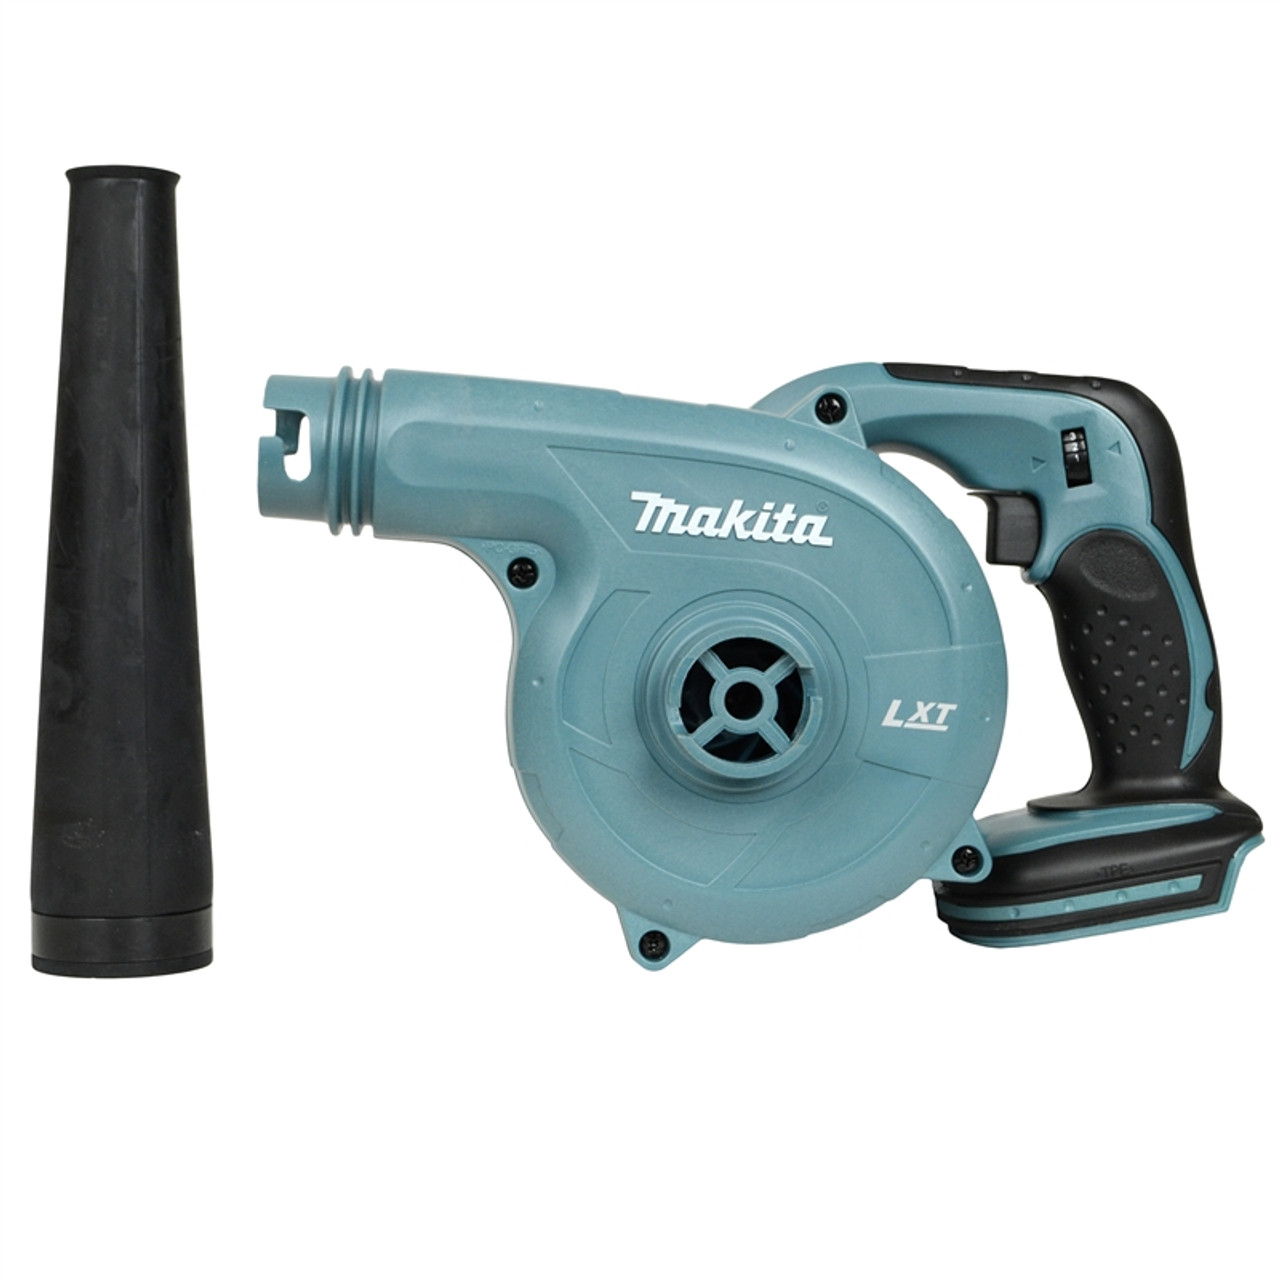 Makita DUB182Z 18V LXT Lithium-Ion Cordless Blower (Bare Tool Only